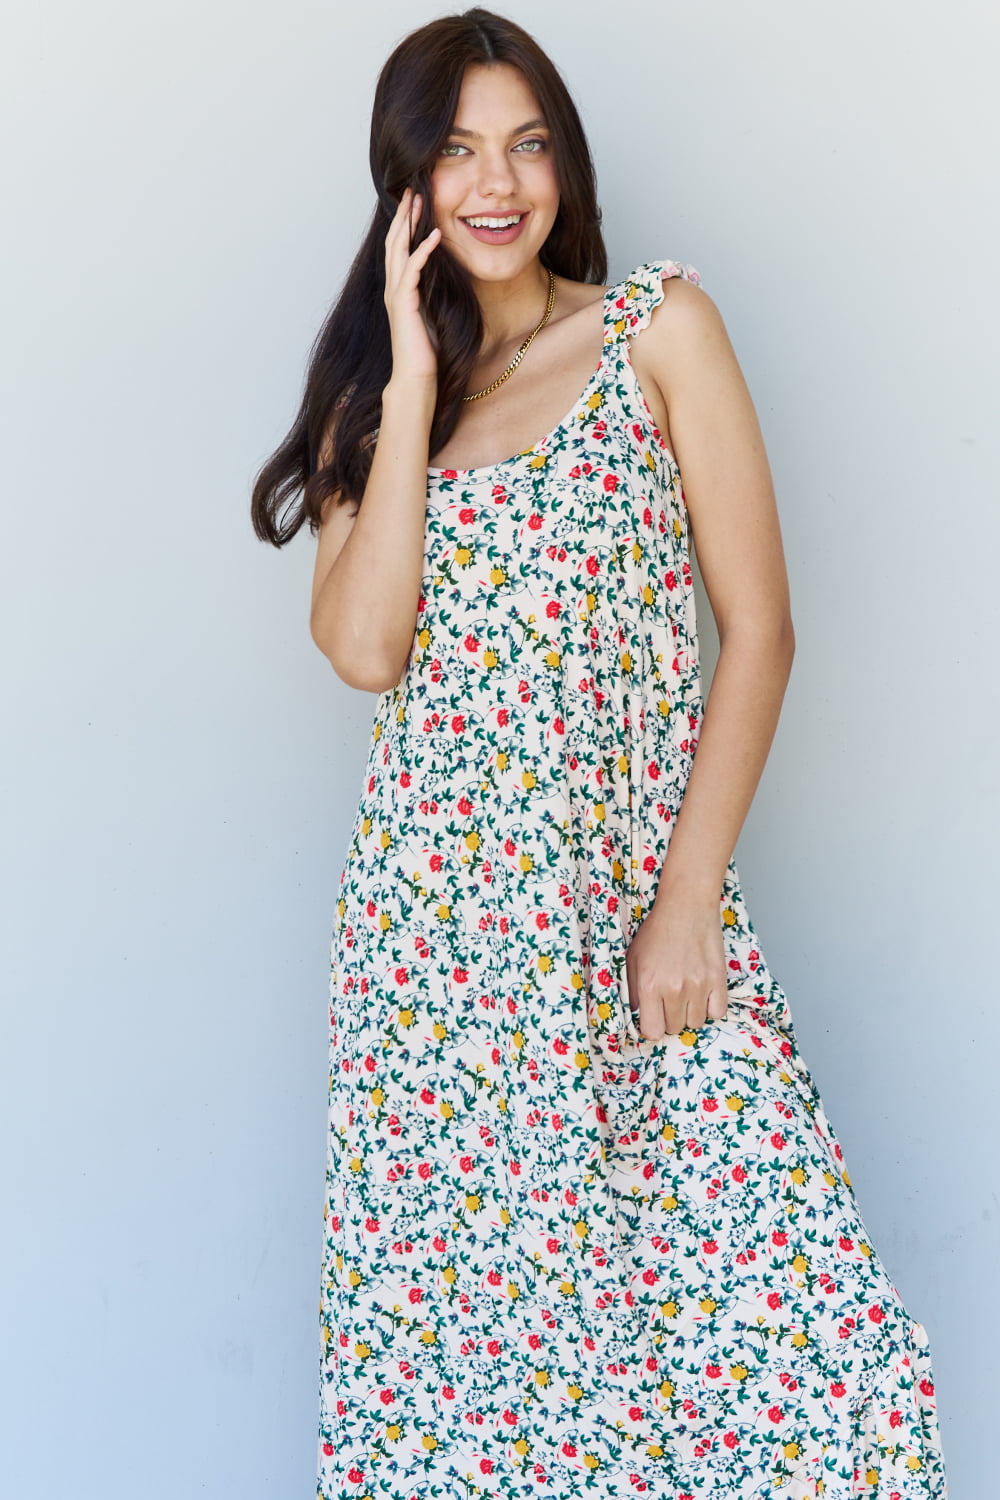 Light Gray Doublju In The Garden Ruffle Floral Maxi Dress in Natural Rose Sentient Beauty Fashions Apparel & Accessories